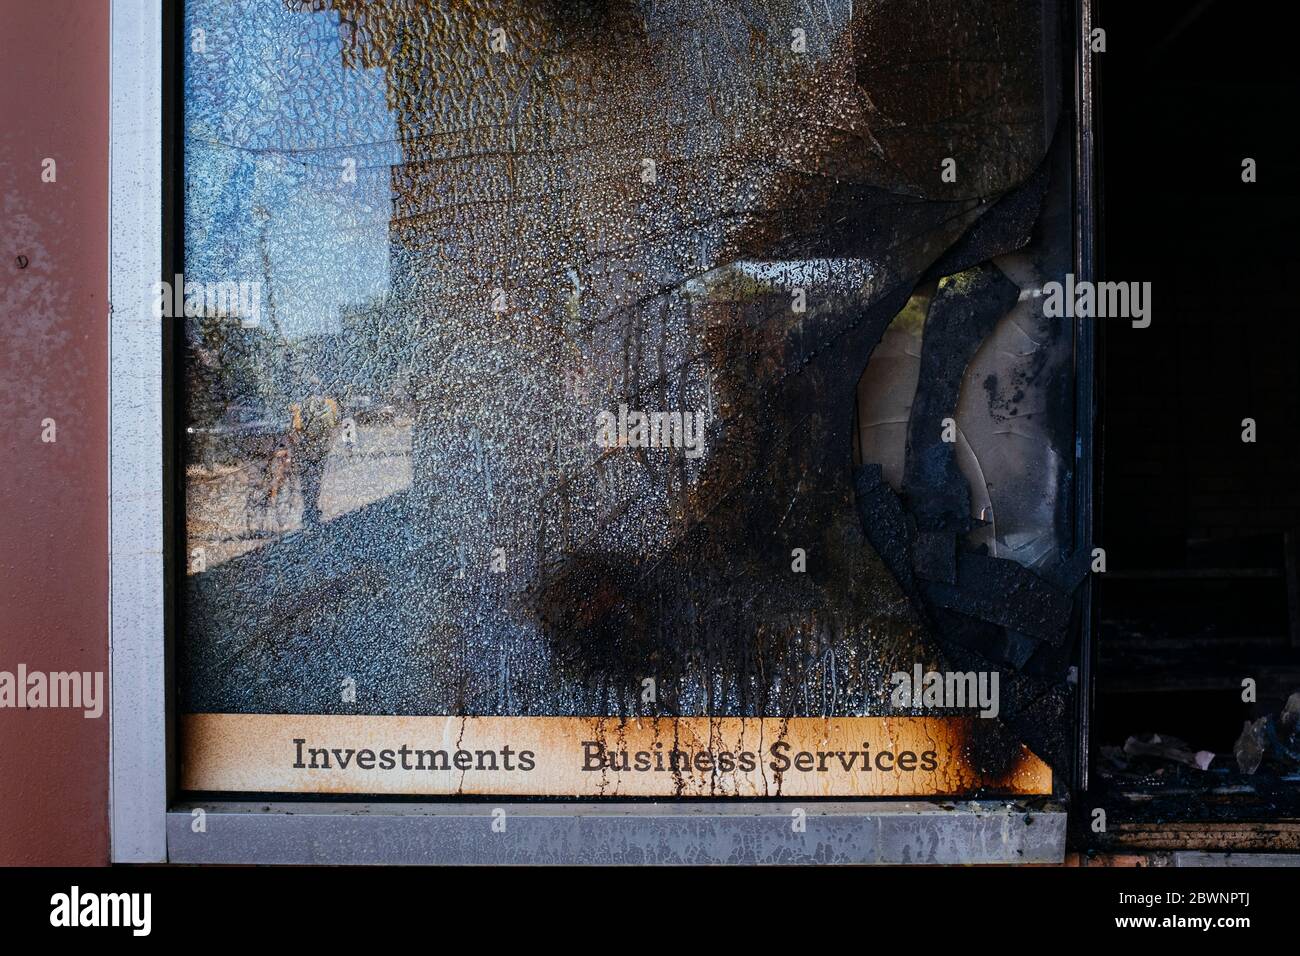 Aftermath of the riots the Wells Fargo Bank that was looted and set on fire near the Minneapolis 5th police precinct, Saturday, May 30, 2020 Stock Photo